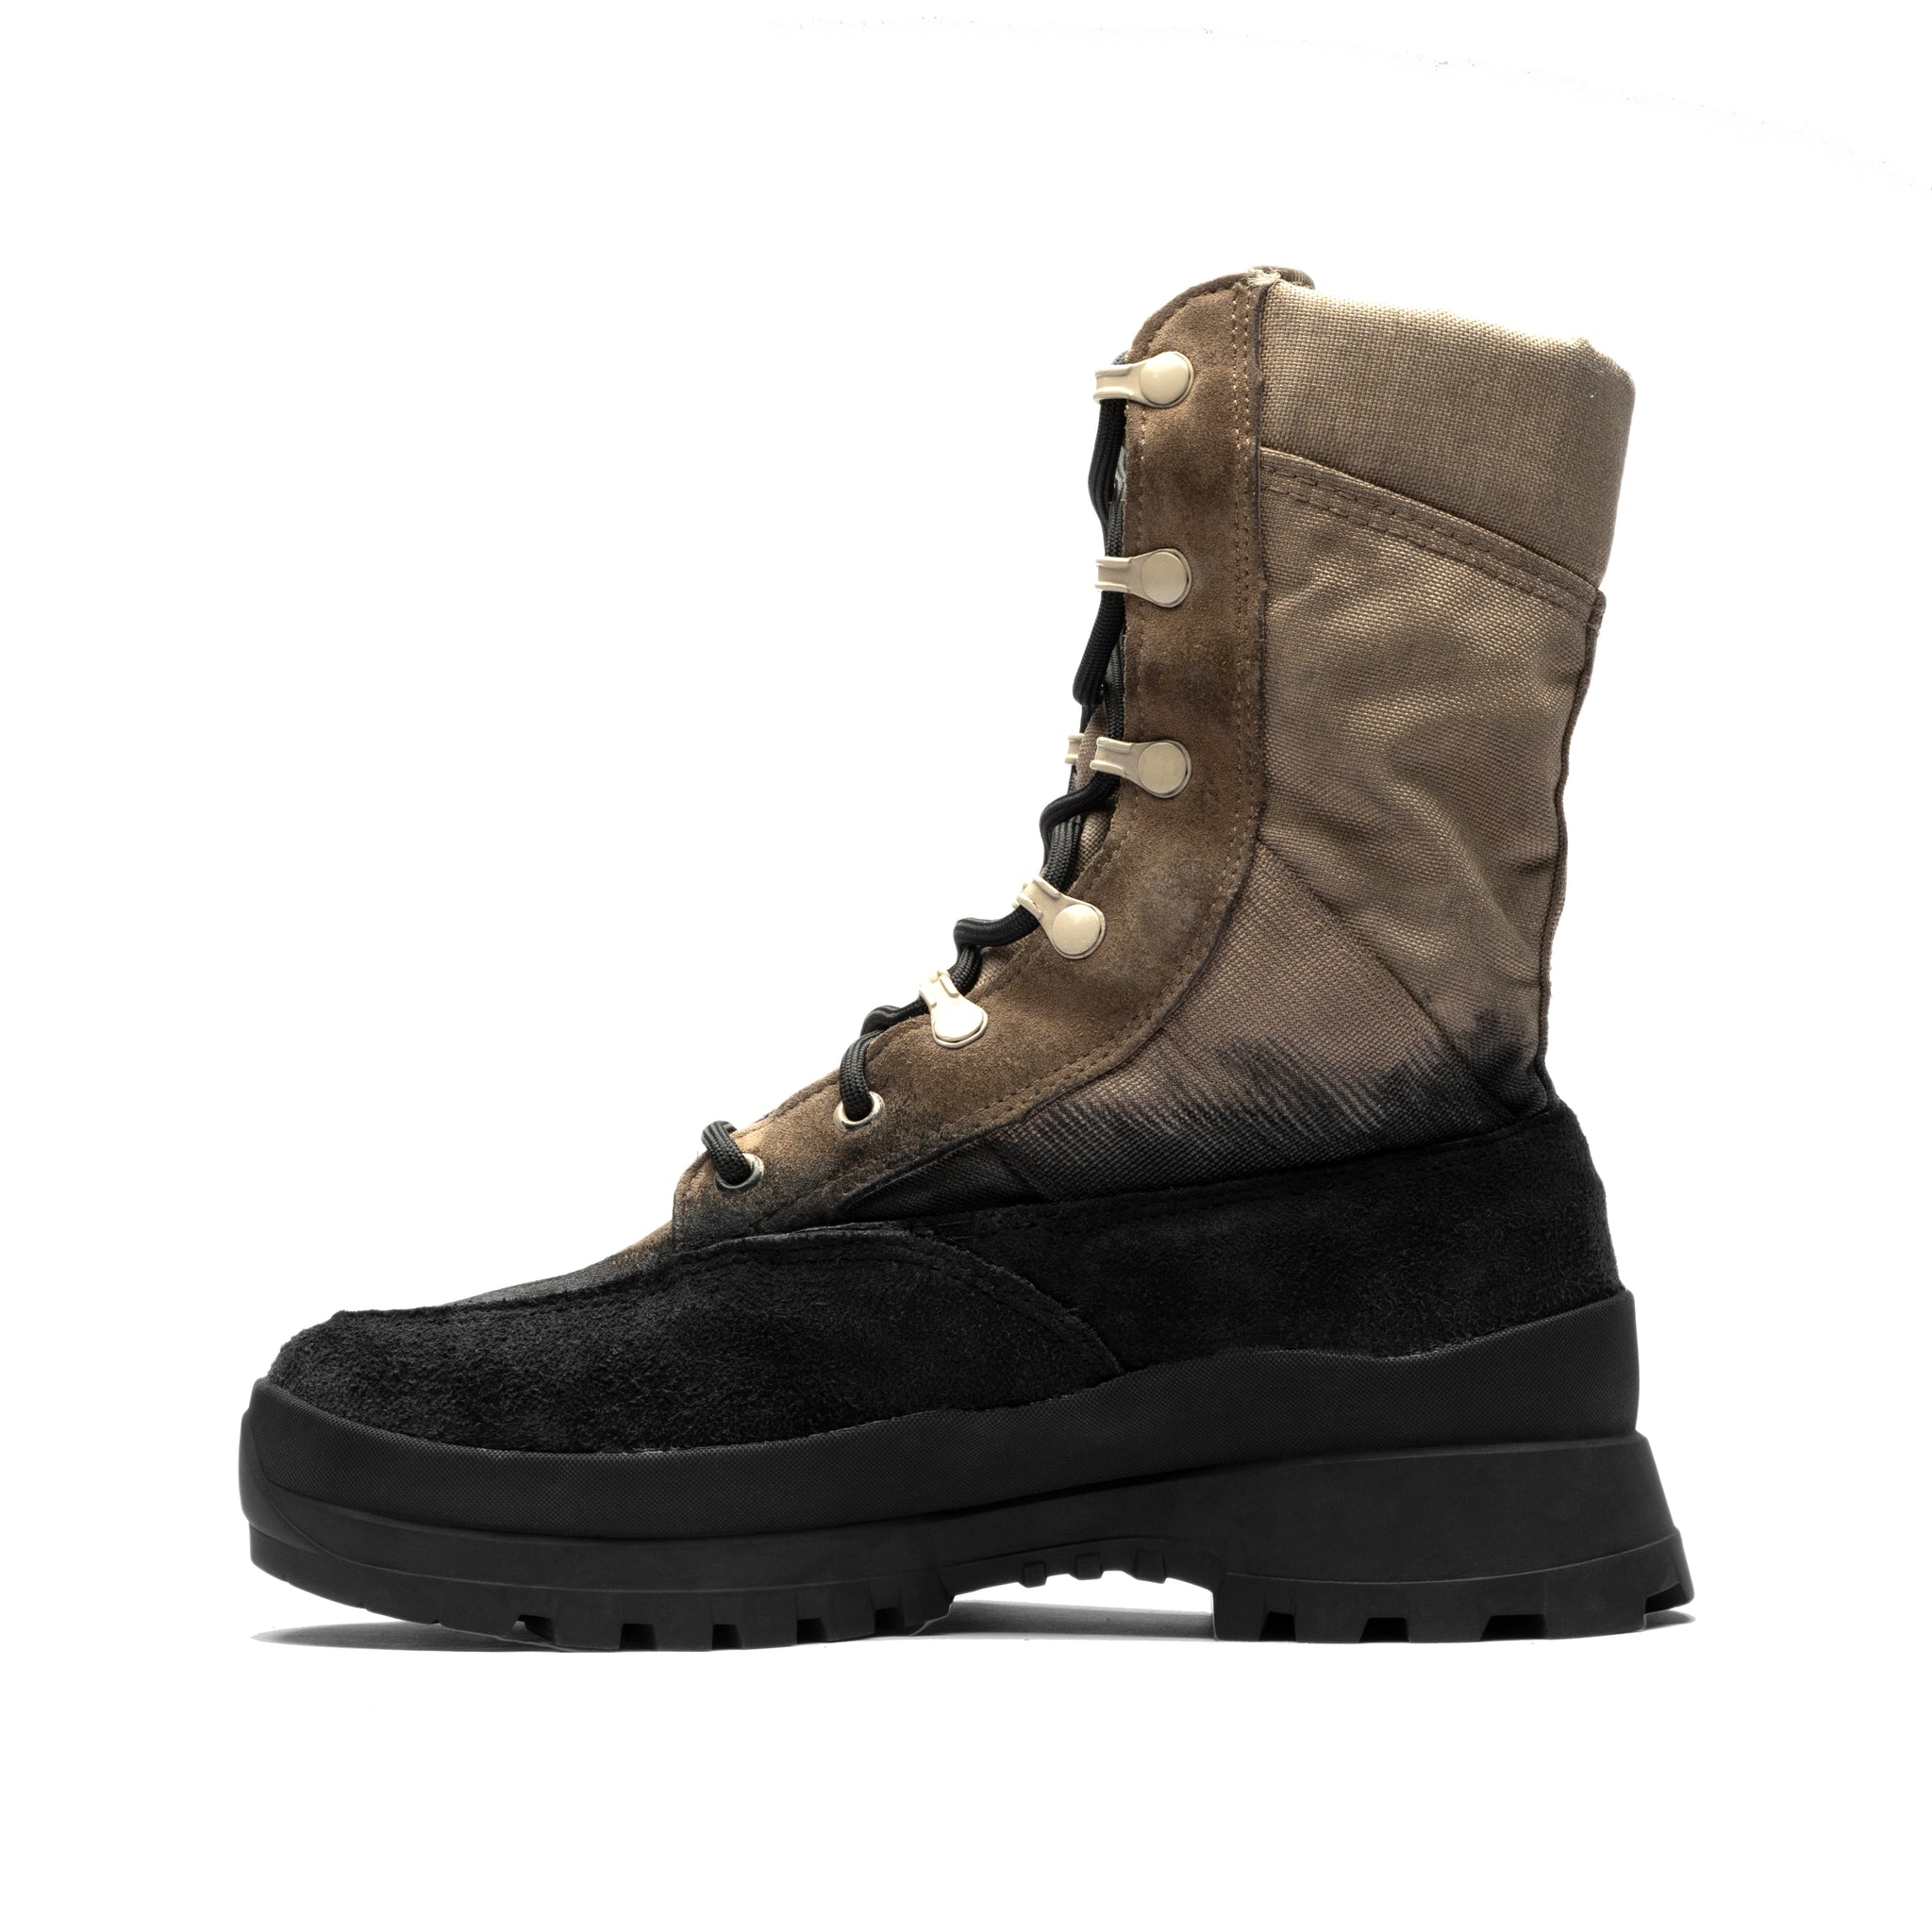 RND: N03 - MILITARY COMBAT BOOT IN SAND